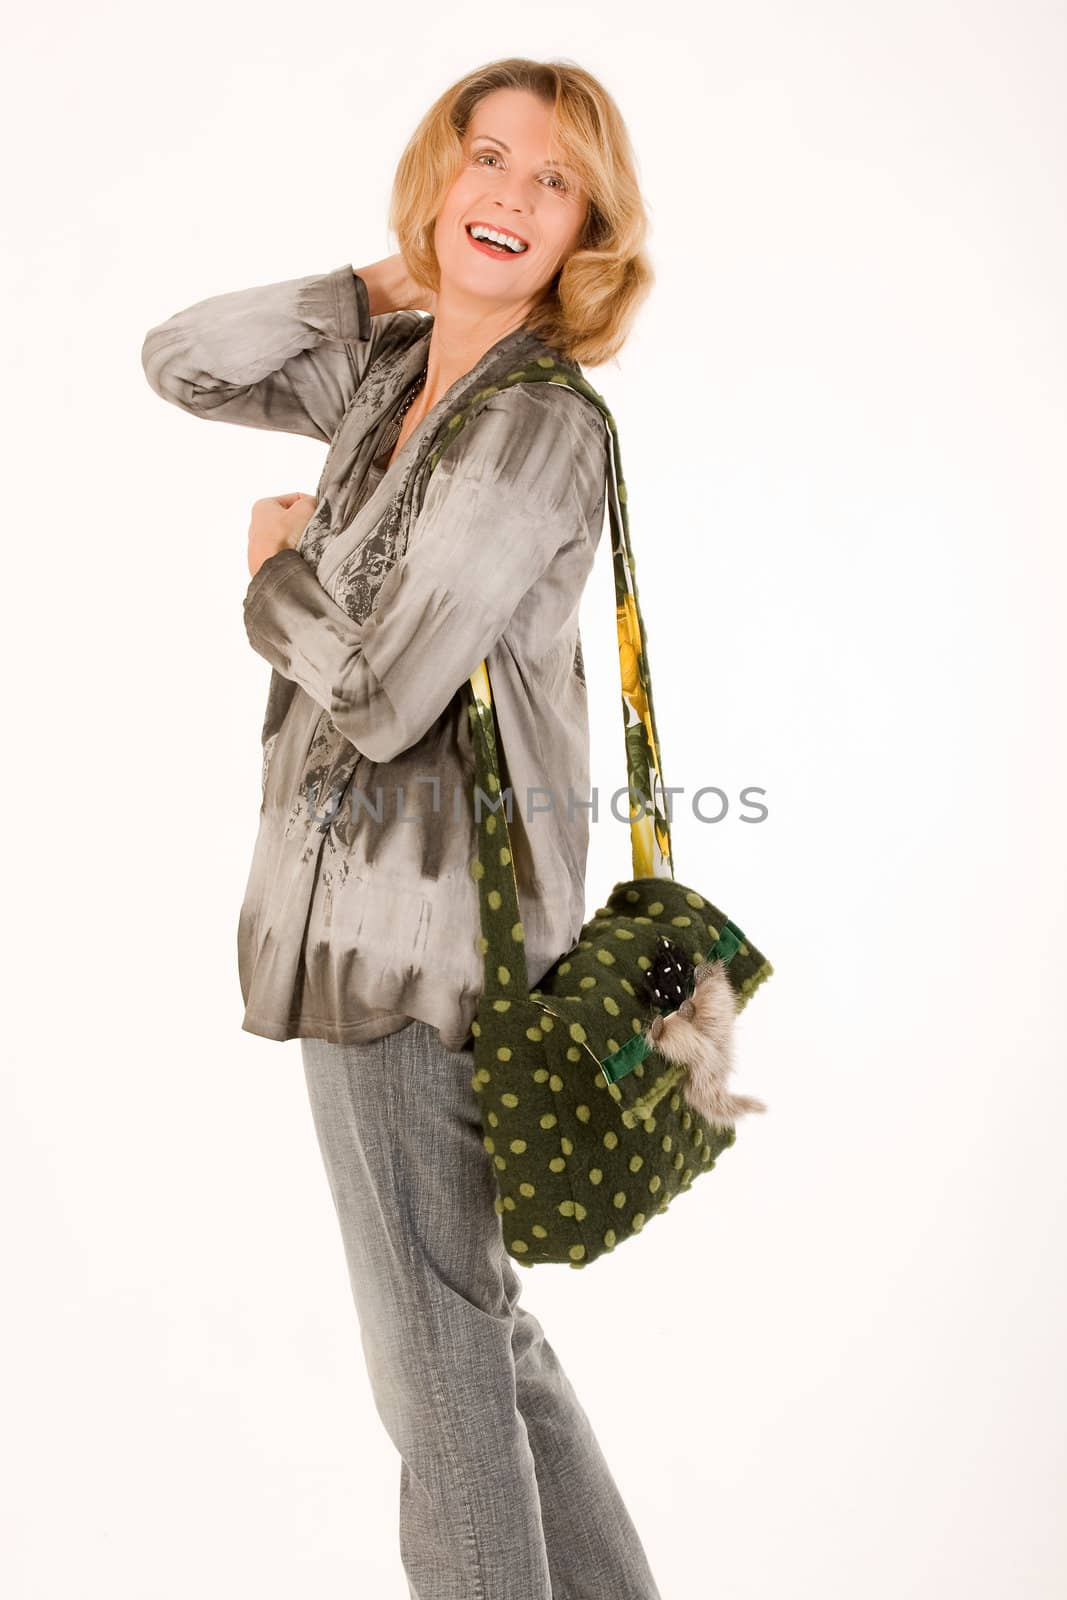 fashionable lady with green designer bag